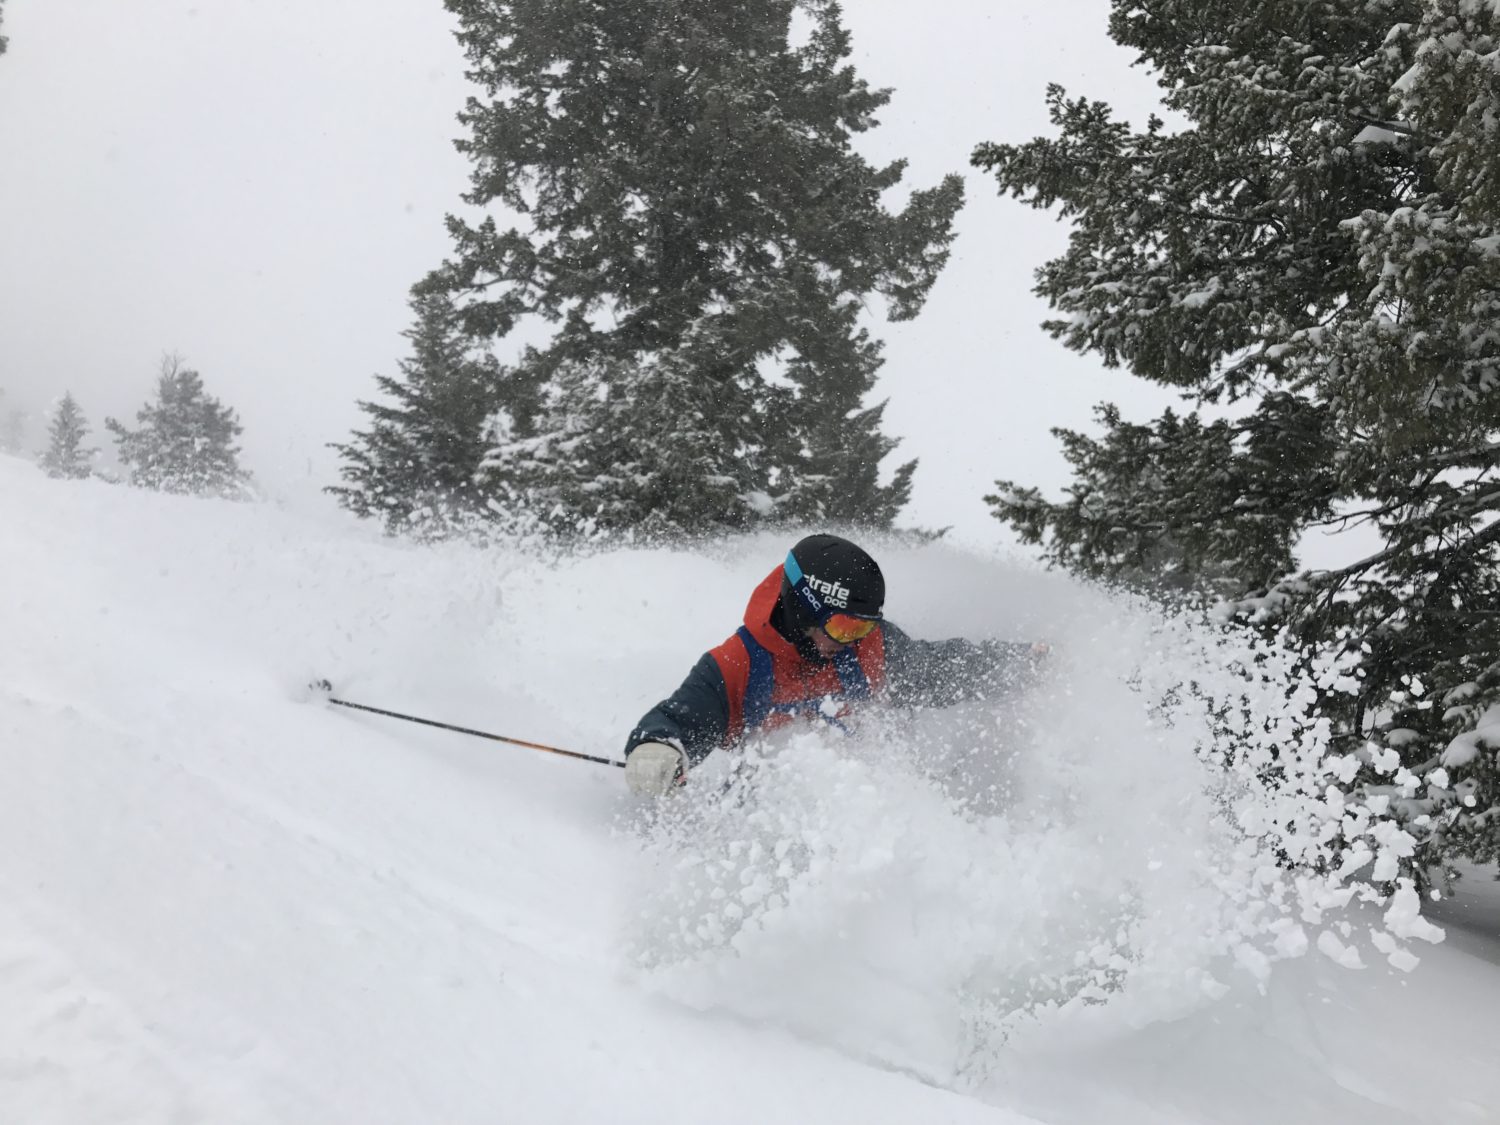 Jackson Hole, WY today. Skier: Connery Lundin photo: snowbrains